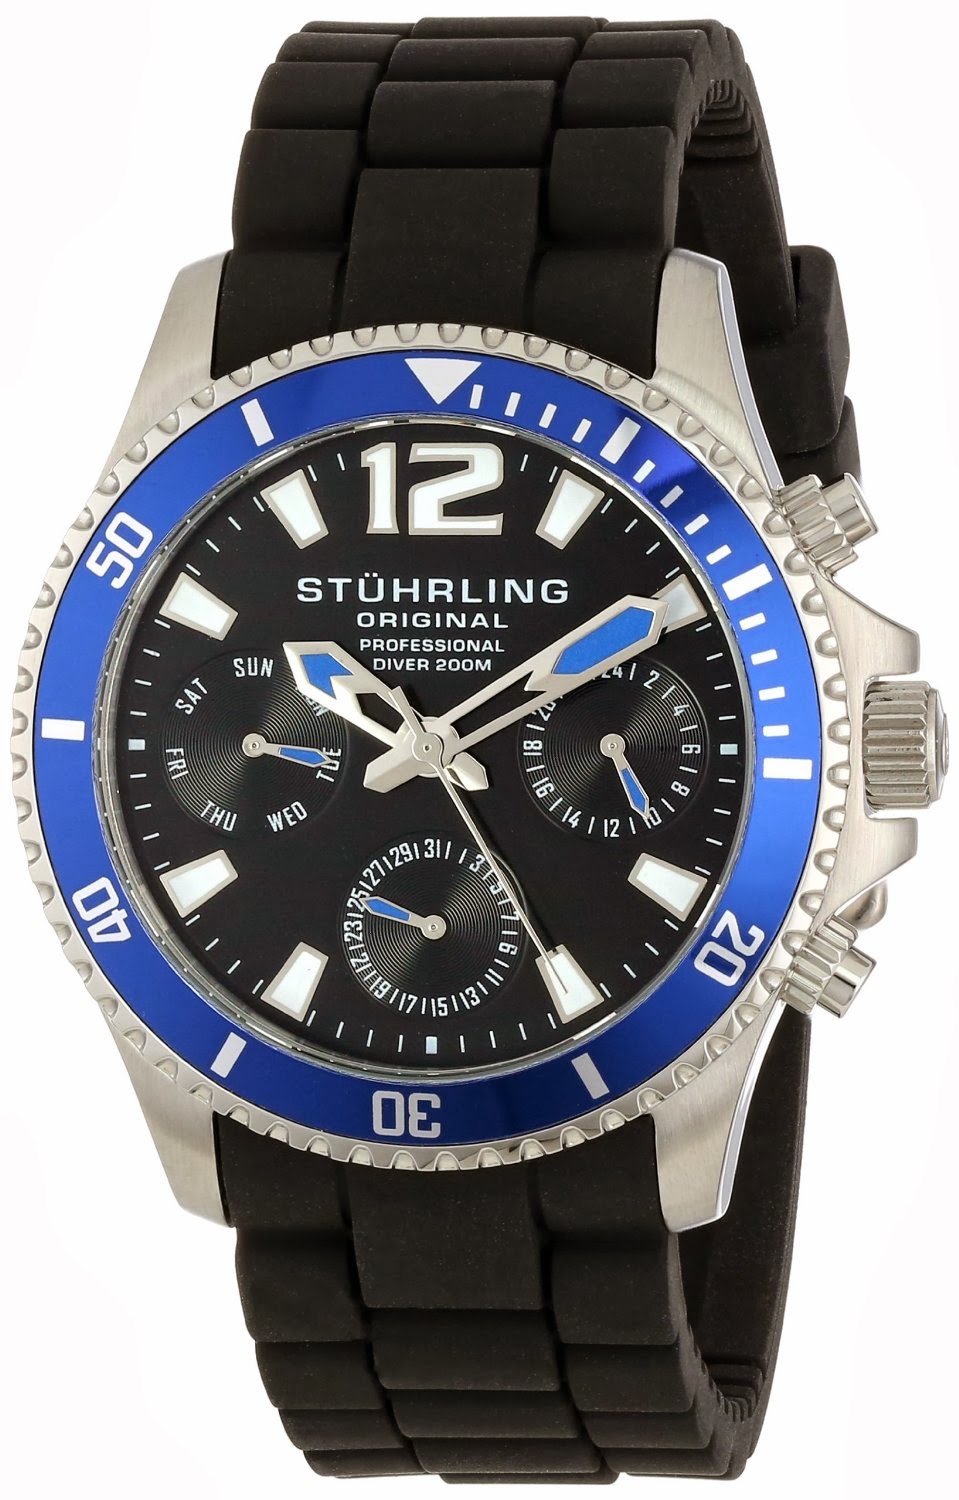 people who love diving and diver we proud to present the dive watches ...